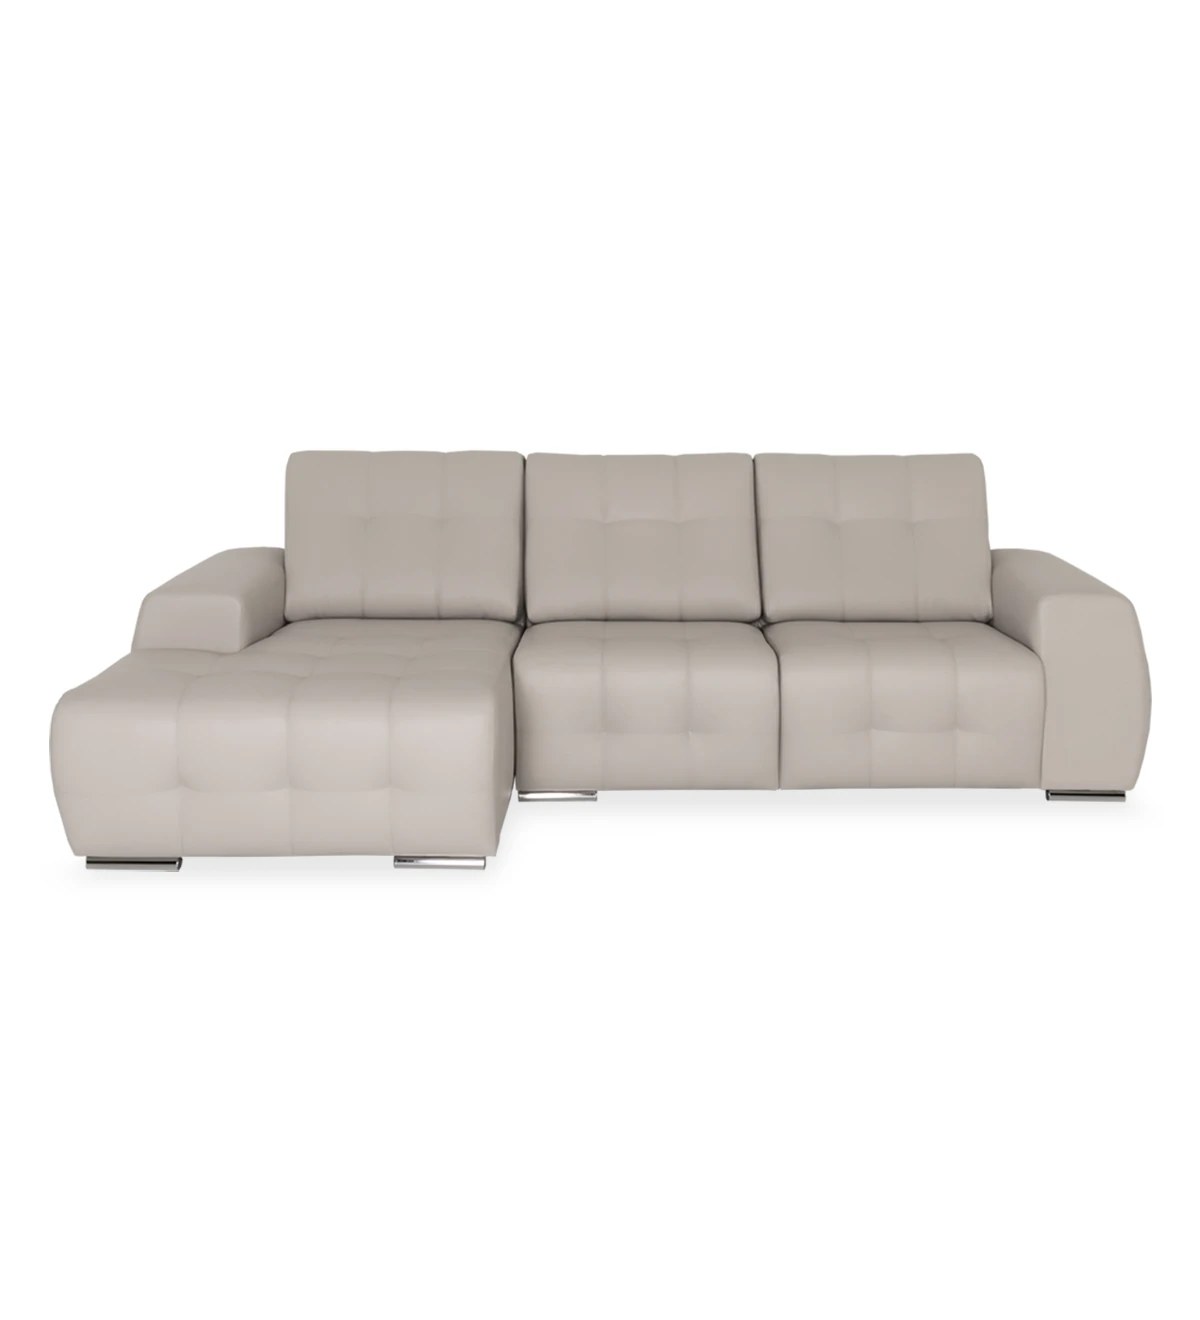 2 Seater with Chaise Longue, upholstered in eco leather.